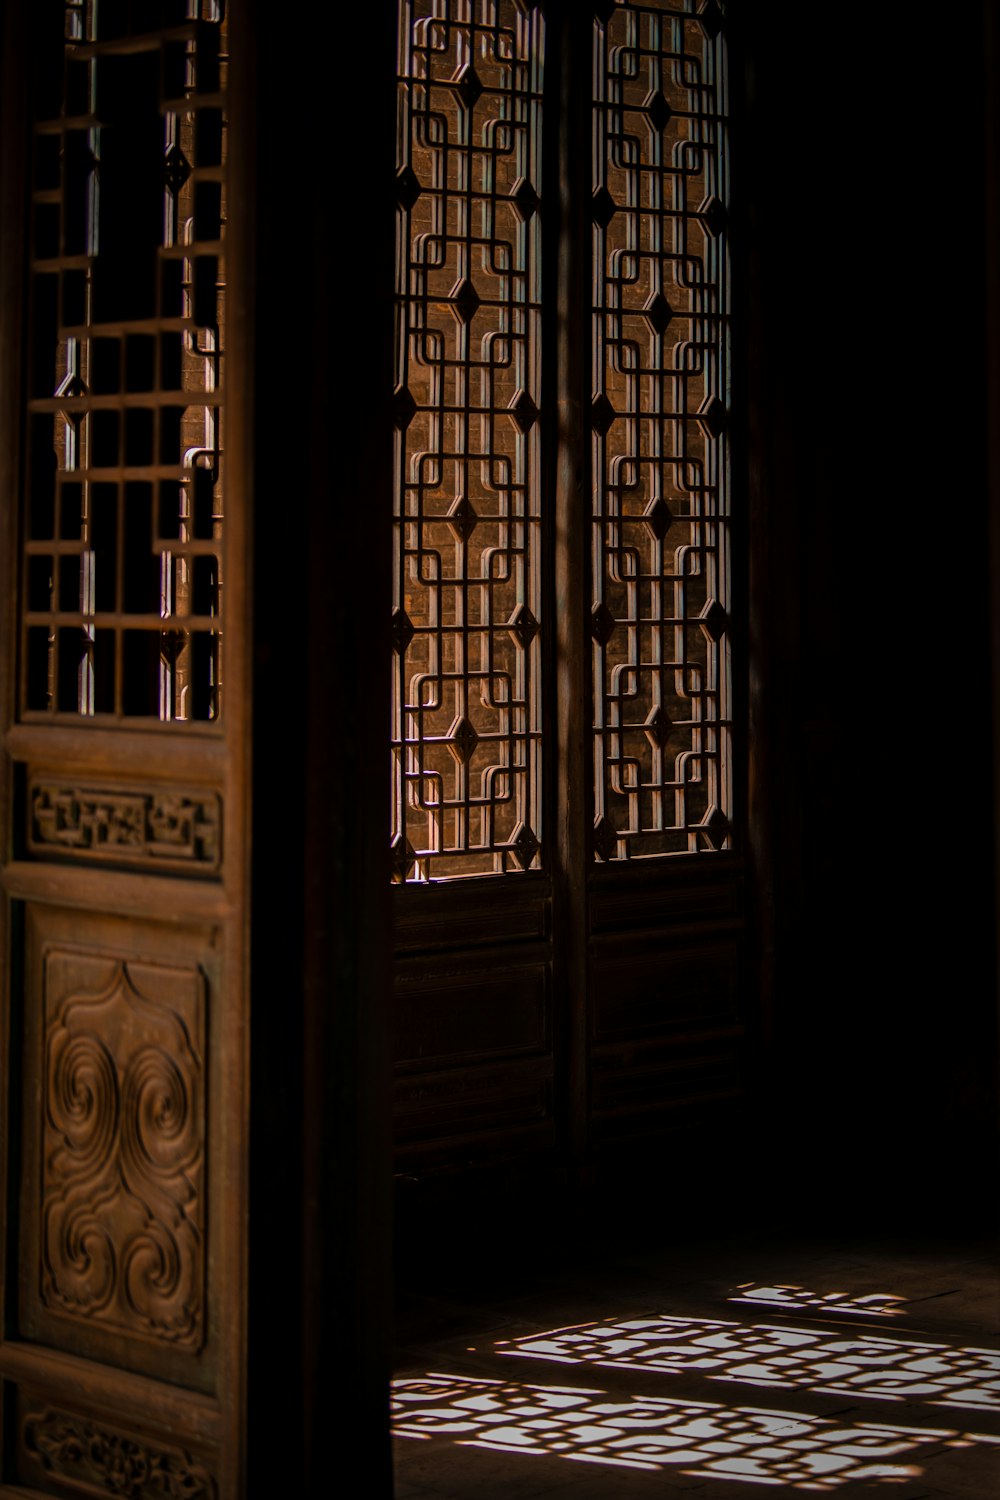 a large wooden door with intricate carvings on it